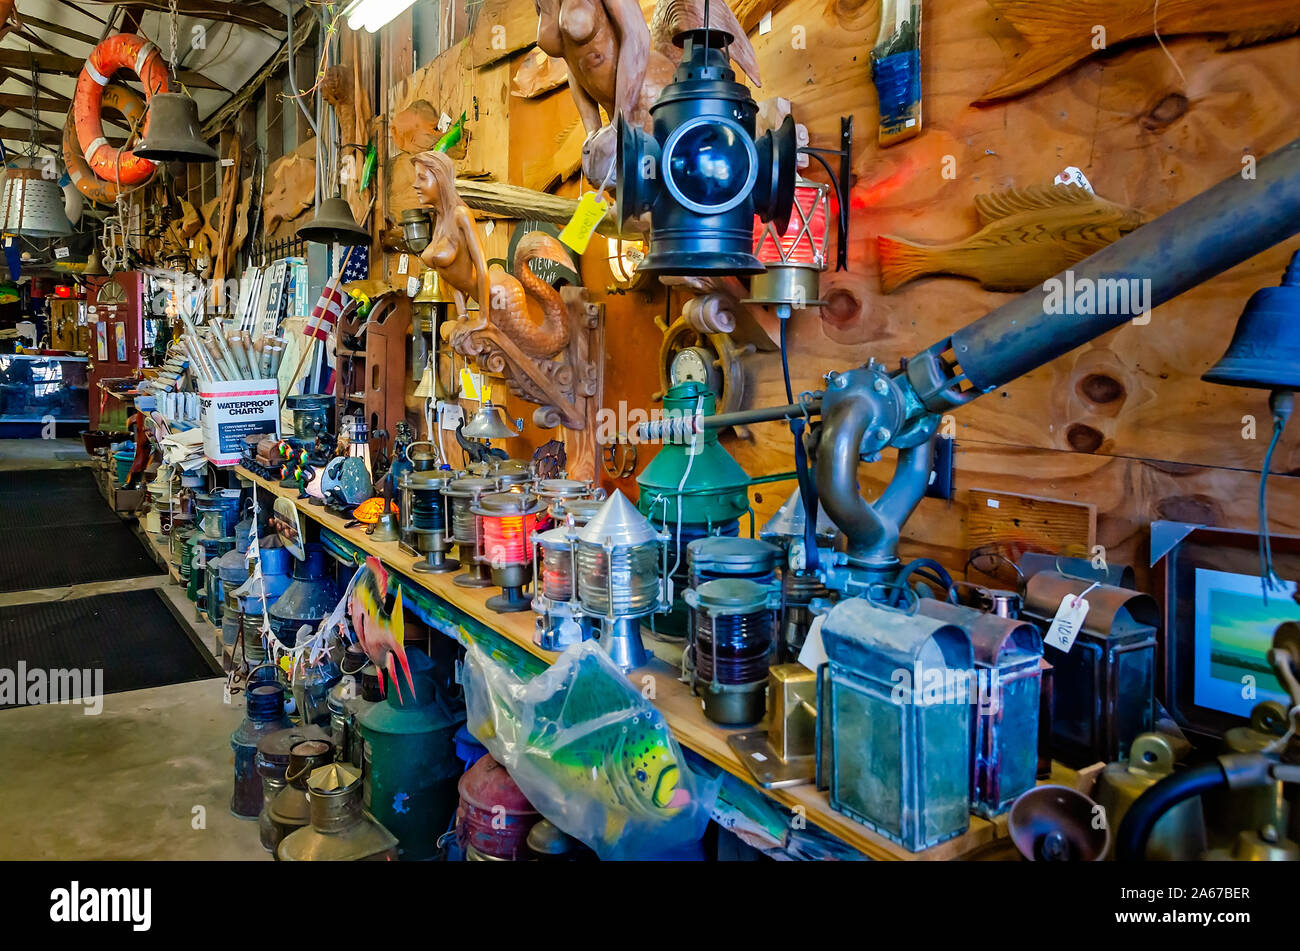 Nautical souvenirs and memorabilia are crowded onto shelves at The Tin Shed, Oct. 6, 2019, in Apalachicola, Florida. Stock Photo